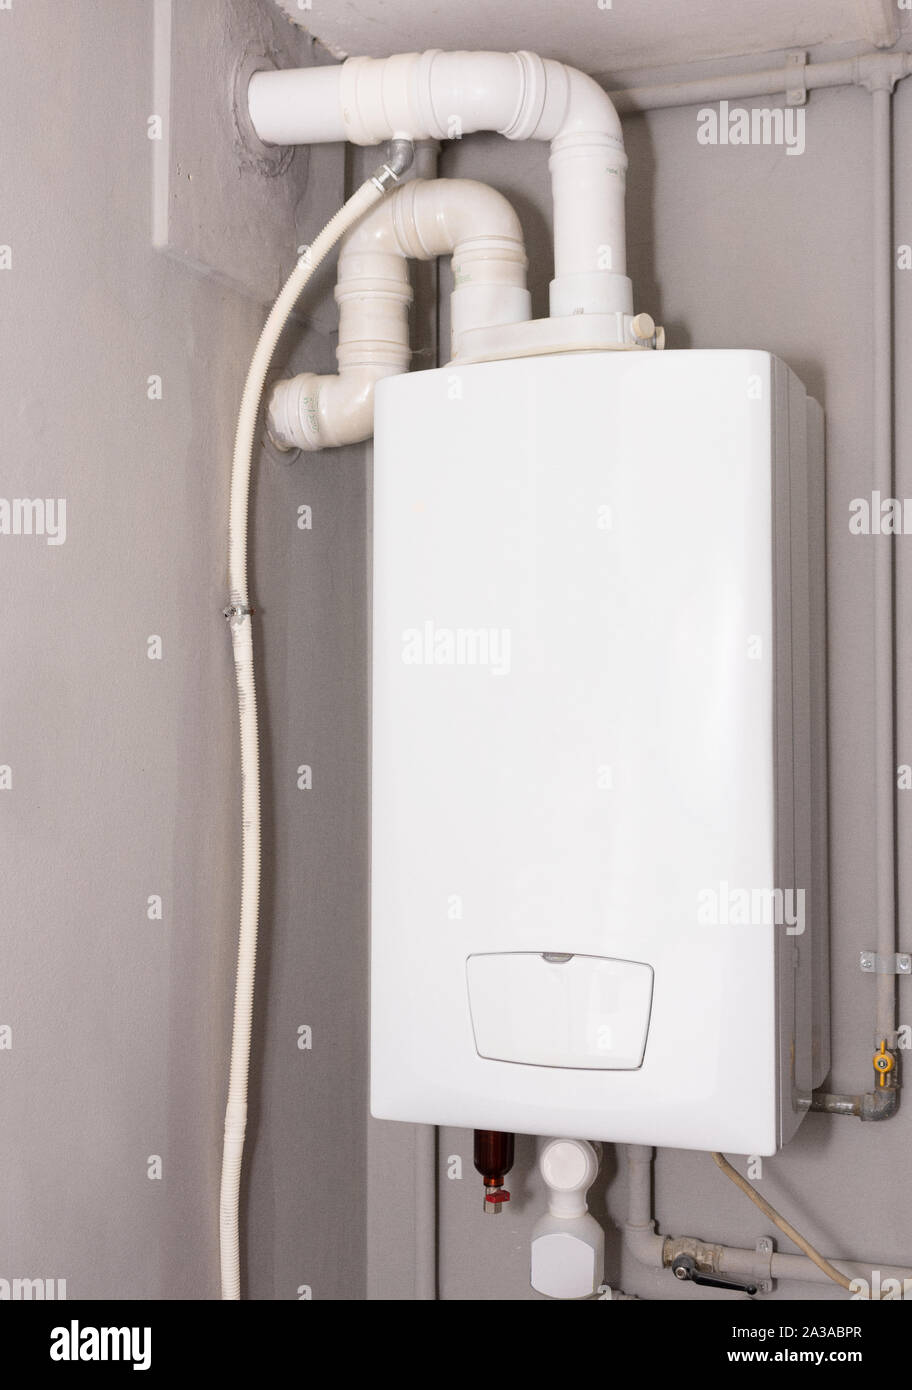 Furnace, Hot Water heater in a laundry room Stock Photo